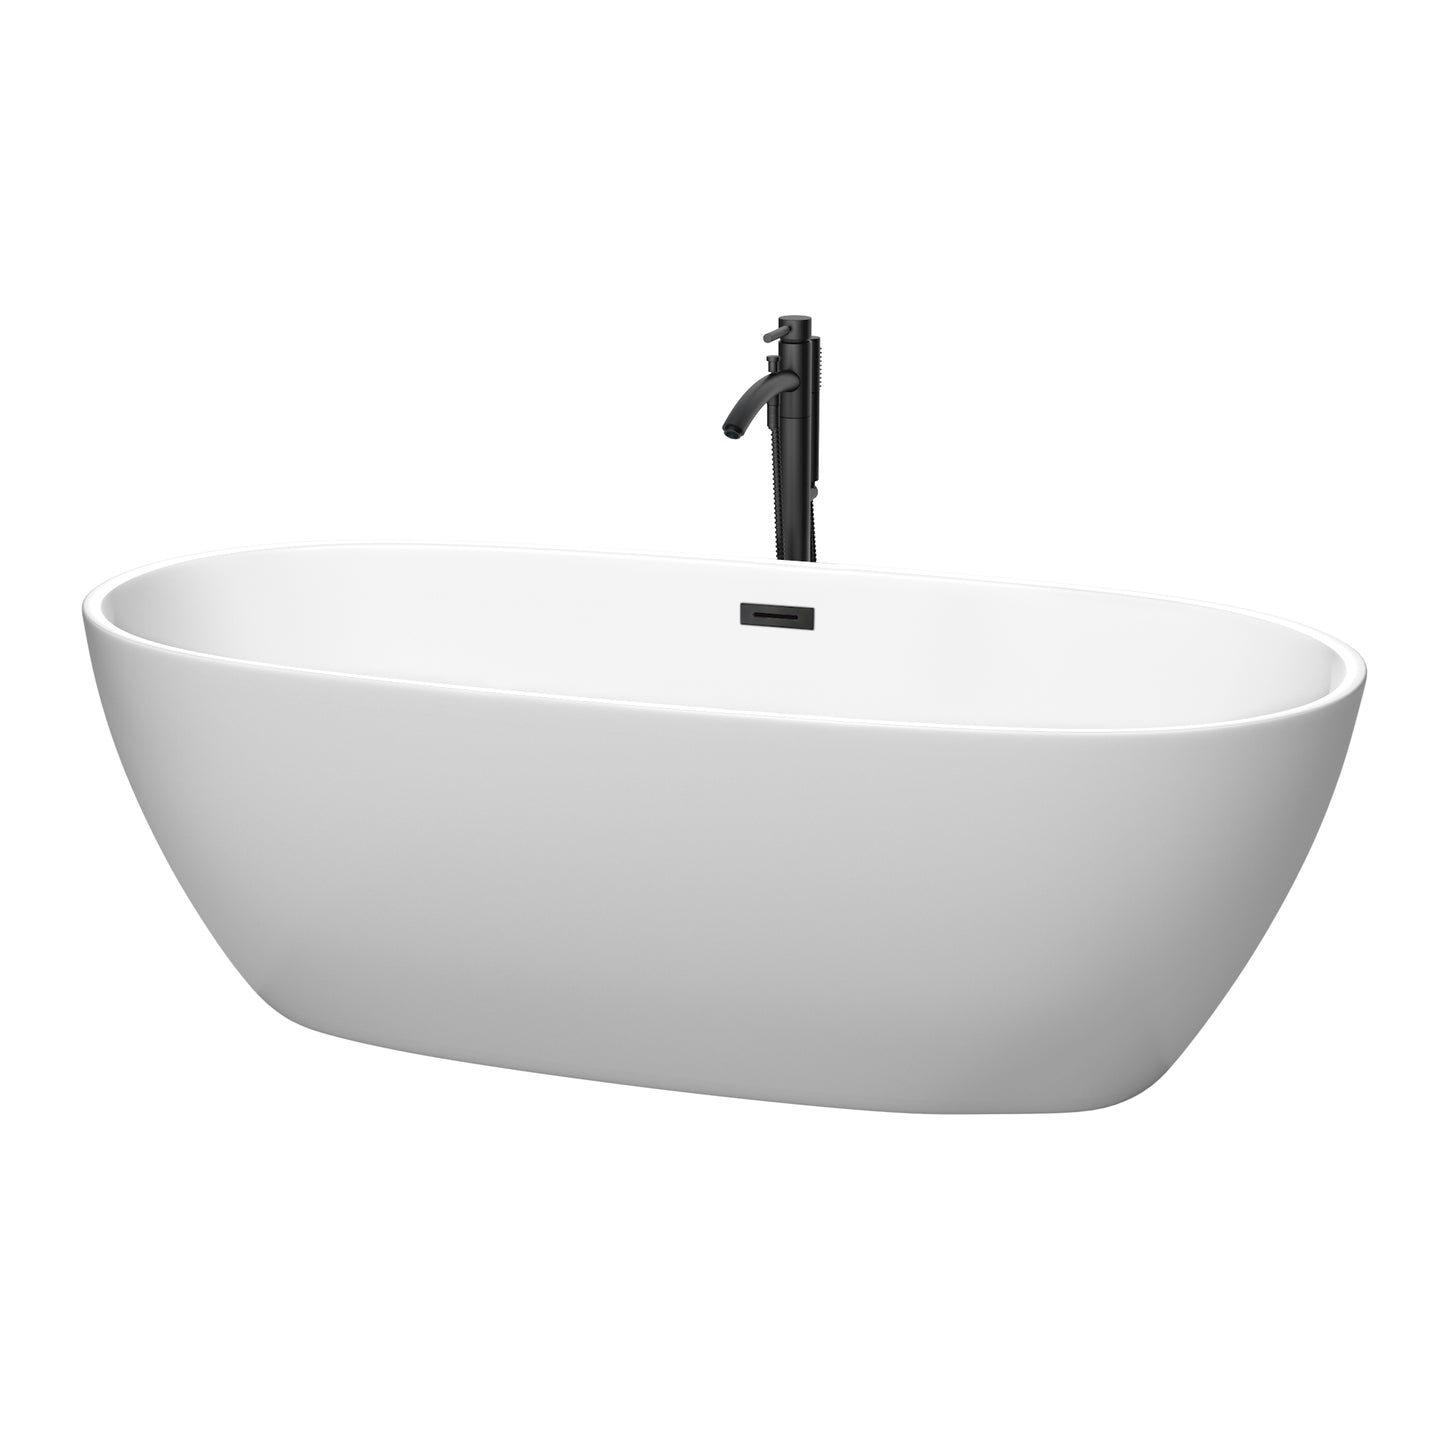 Wyndham Collection Juno 71 Inch Freestanding Bathtub in Matte White with Floor Mounted Faucet, Drain and Overflow Trim in Matte Black - Luxe Bathroom Vanities